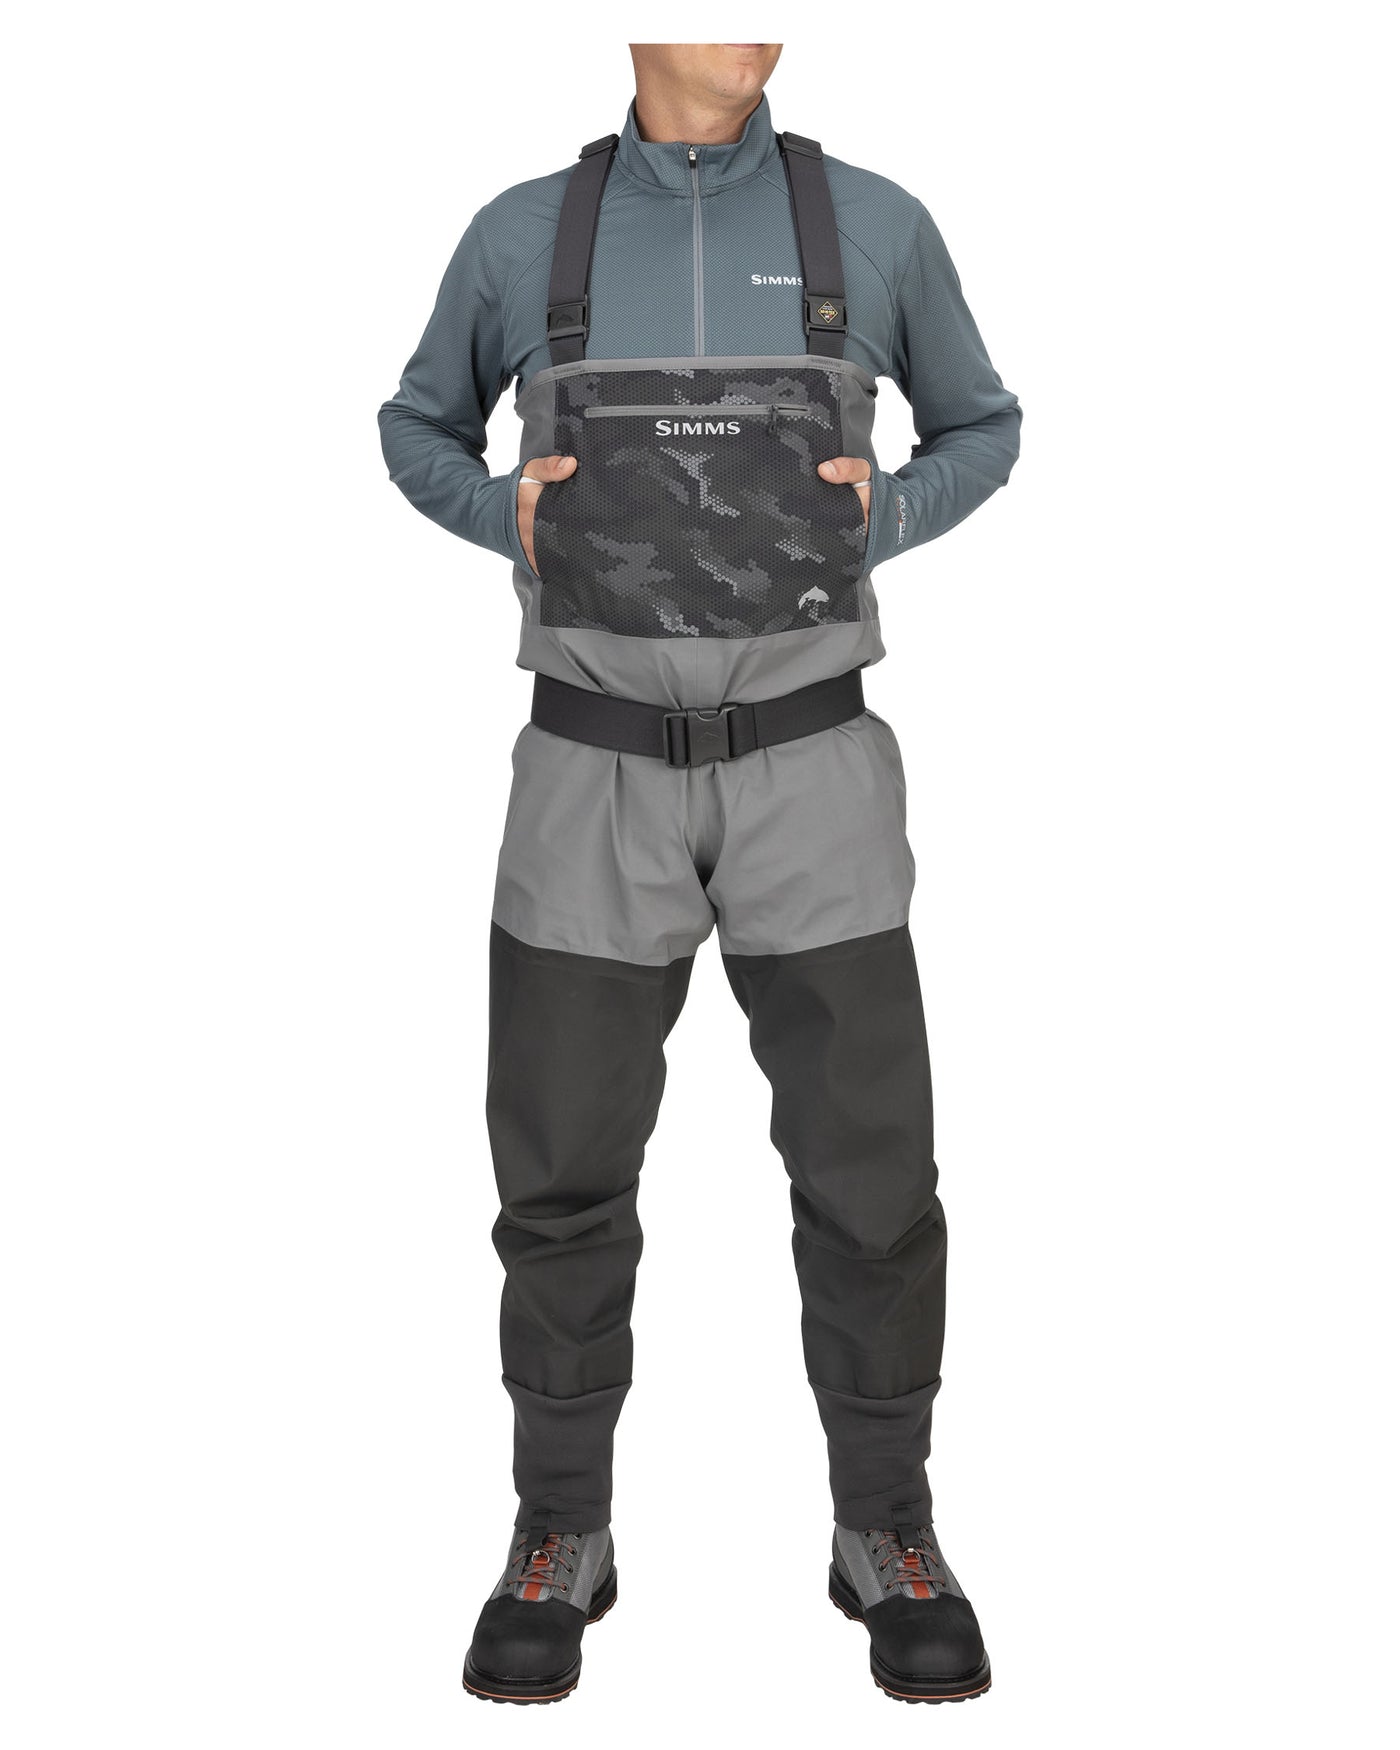 Neoprene Breathable Wader with Stocking Foot